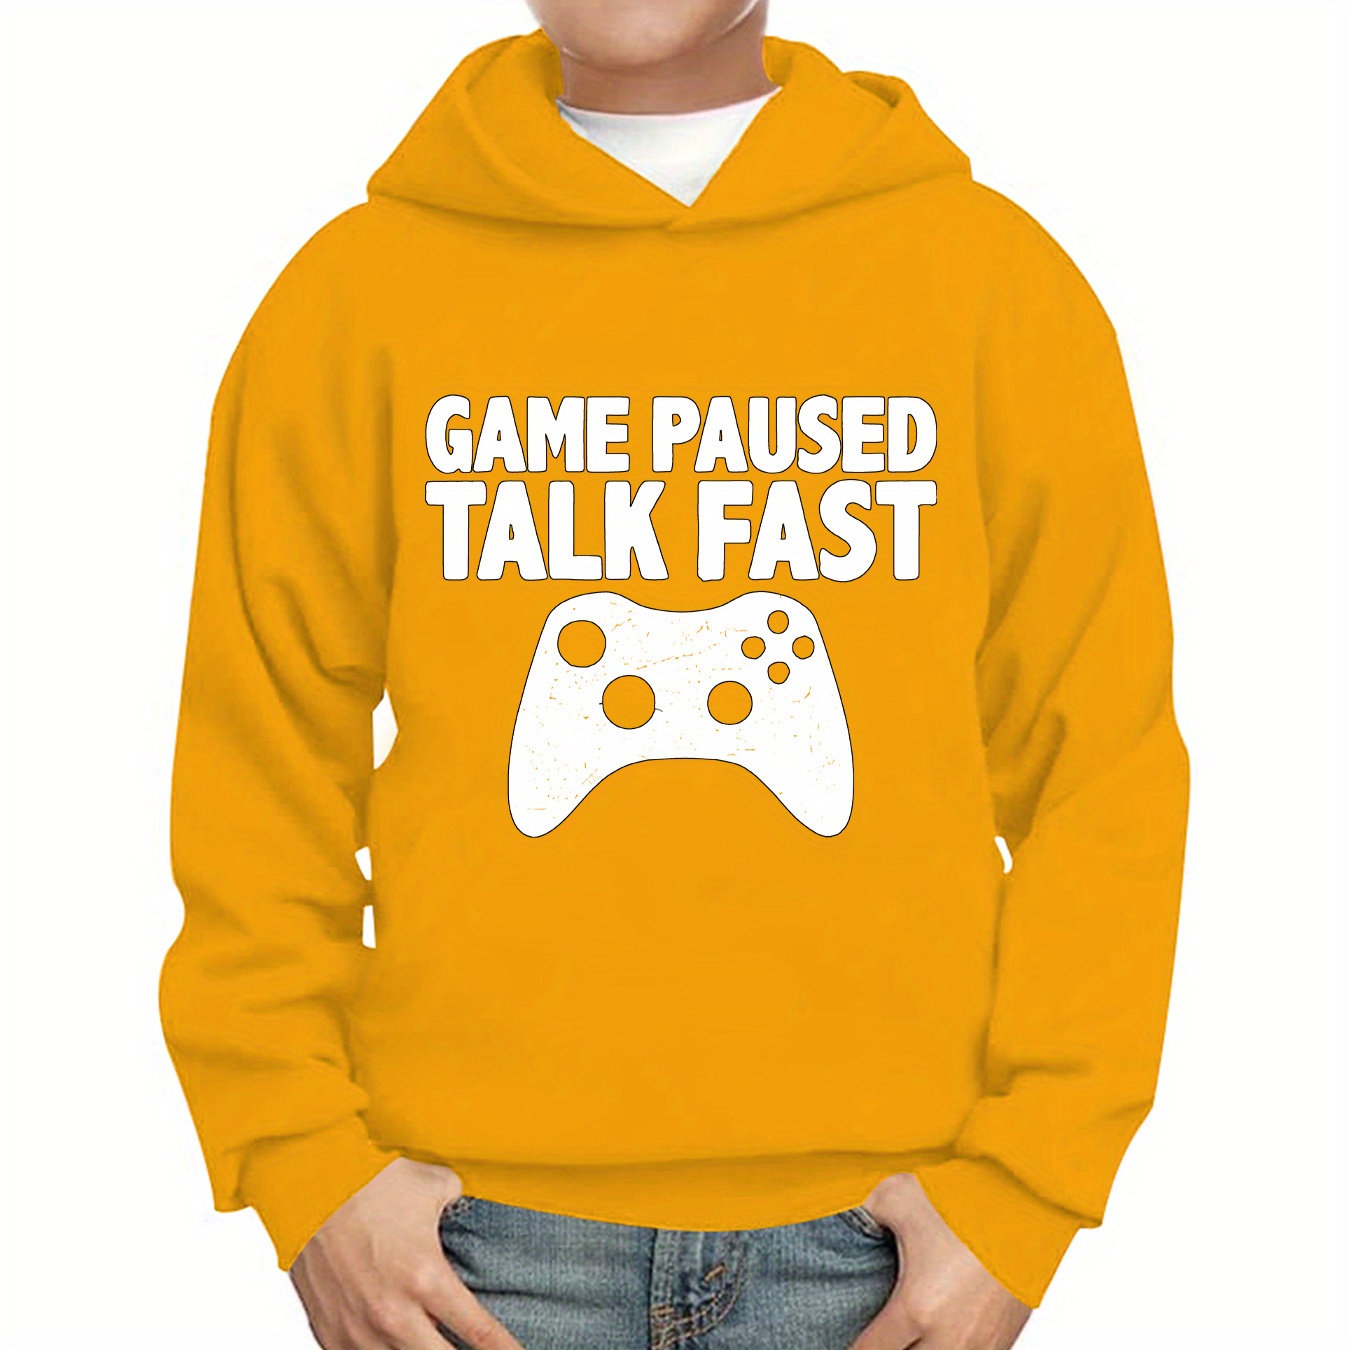 

Game Paused Talk Fast Letter Print Hoodies For Boys - Casual Graphic Design With Stretch Fabric For Comfortable Autumn/winter Wear